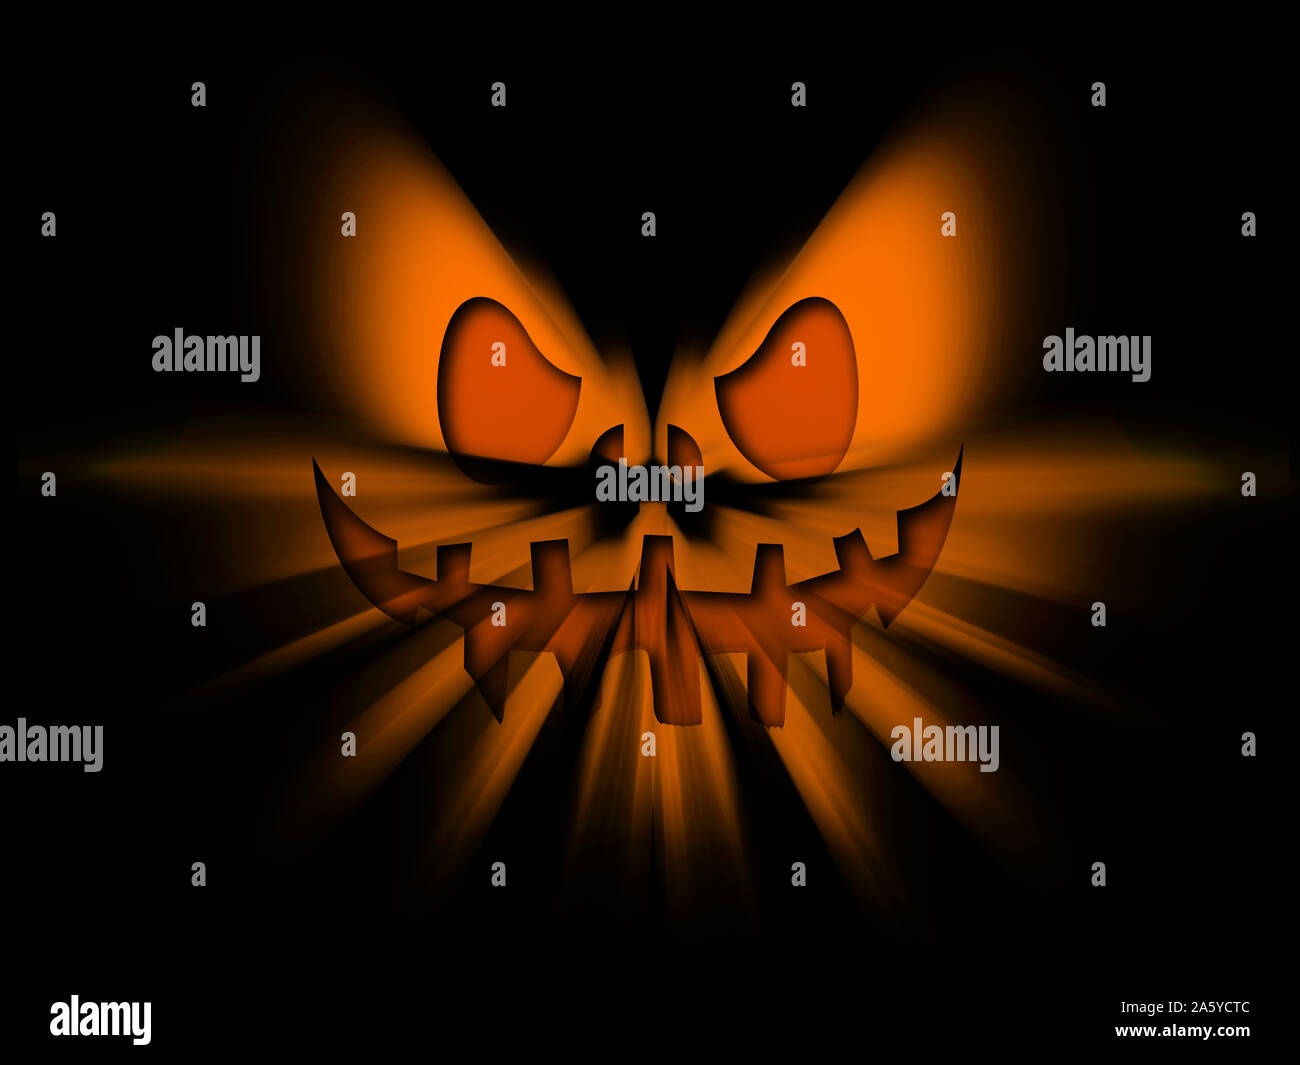 halloween back ground designs for cards and posters Stock Photo